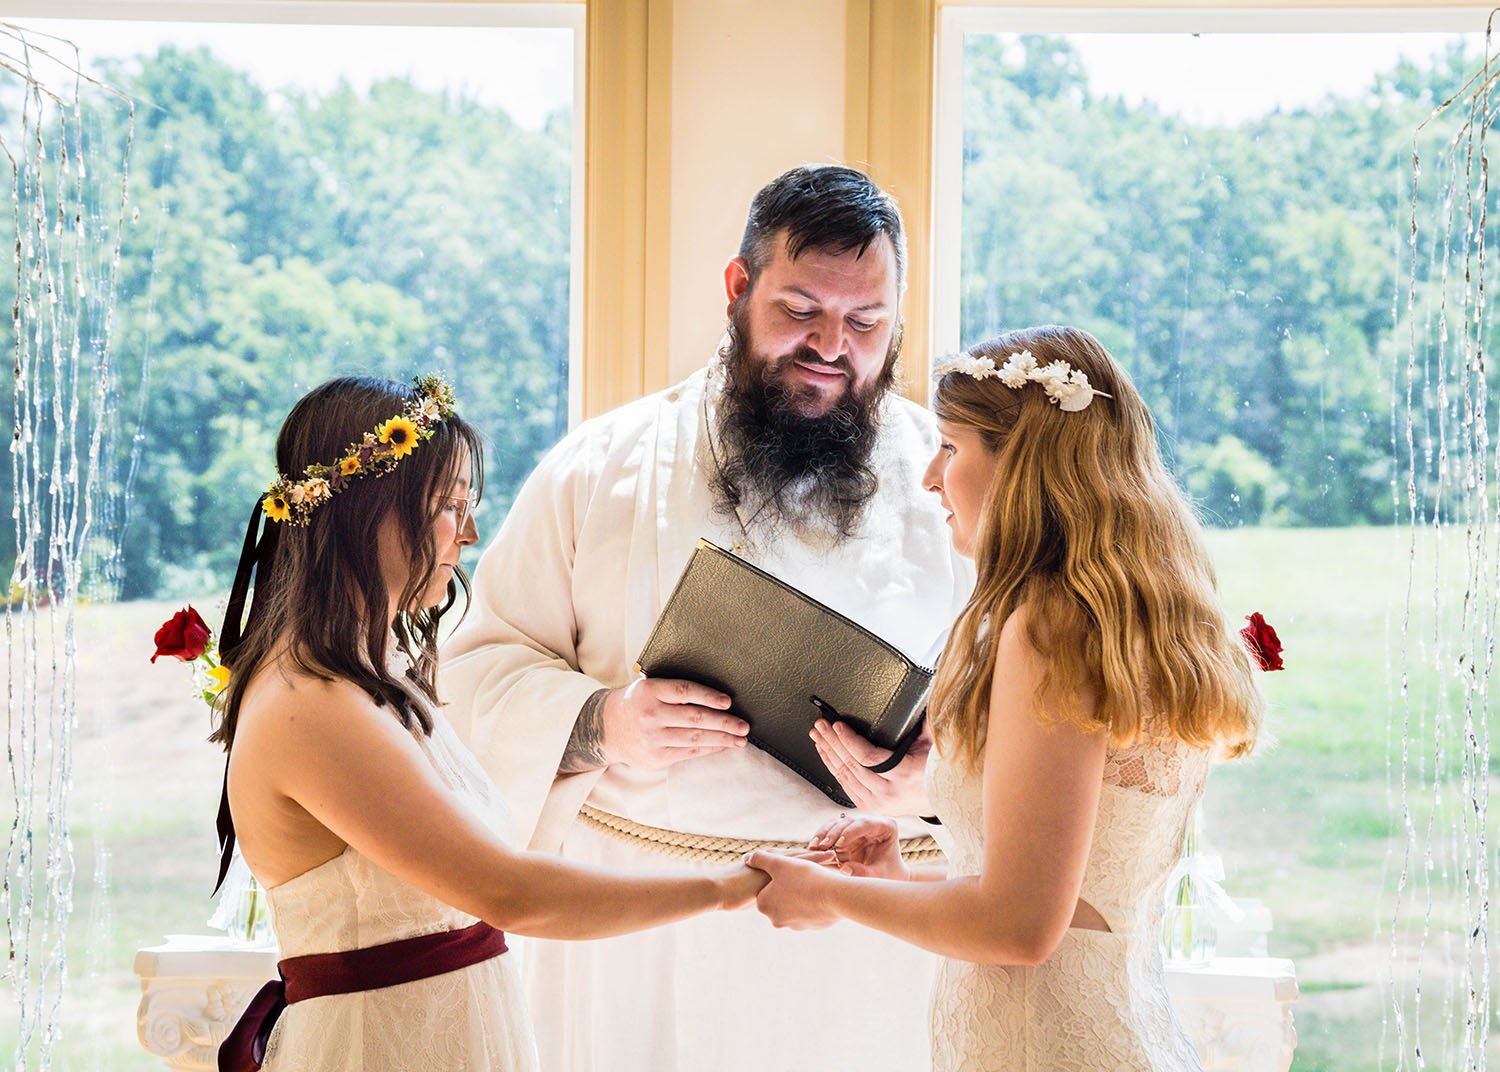 Two LGBTQ+ marriers hold hands in front of their LGBTQ officiant, who is reading something from his binder, while one of the marriers starts to place a ring on their partner's finger.